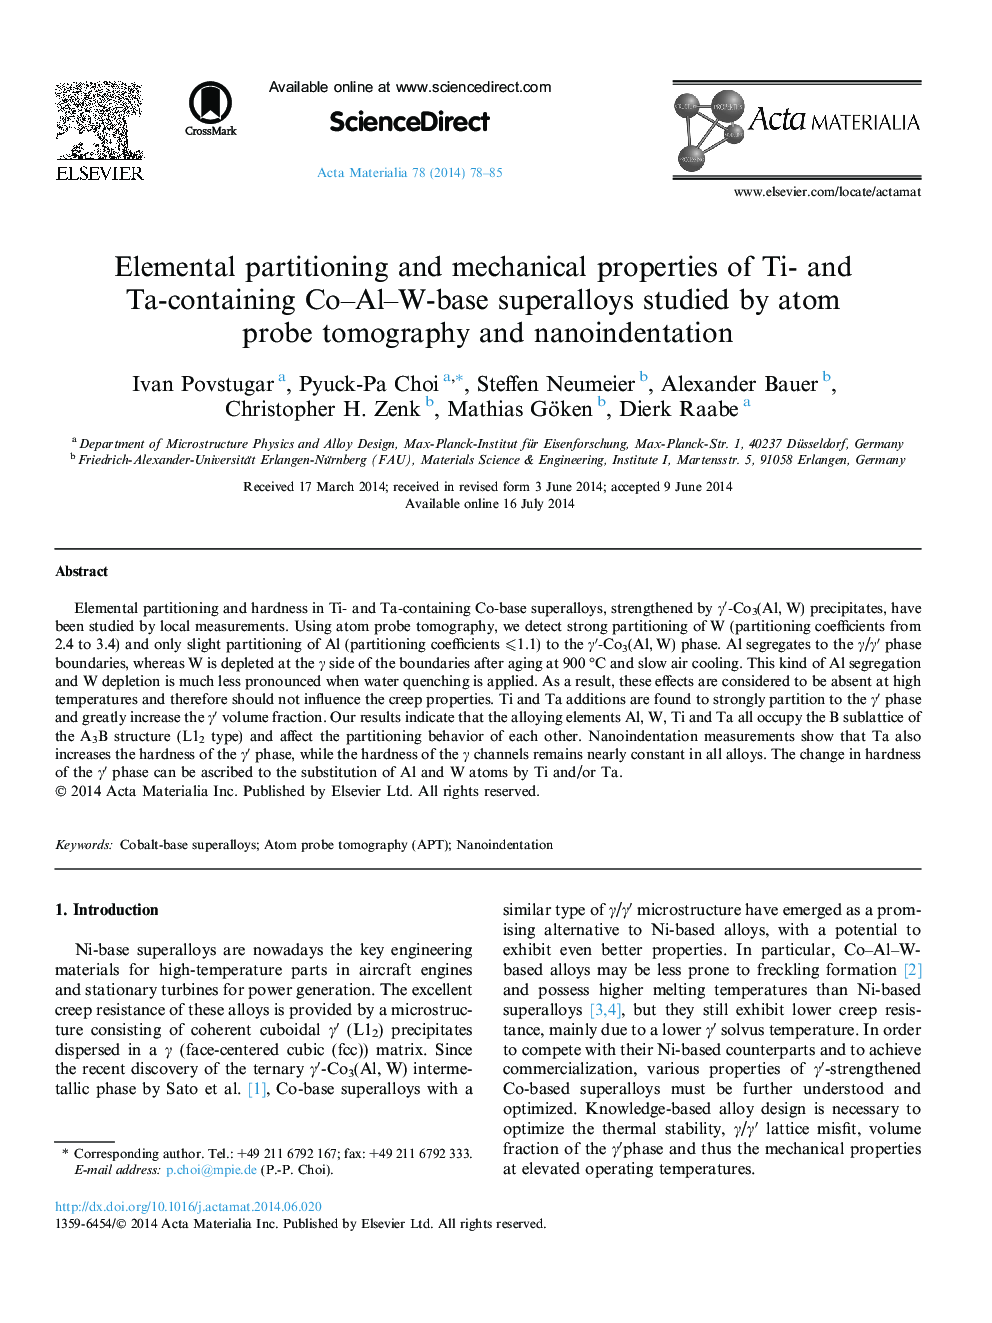 Elemental partitioning and mechanical properties of Ti- and Ta-containing Co–Al–W-base superalloys studied by atom probe tomography and nanoindentation